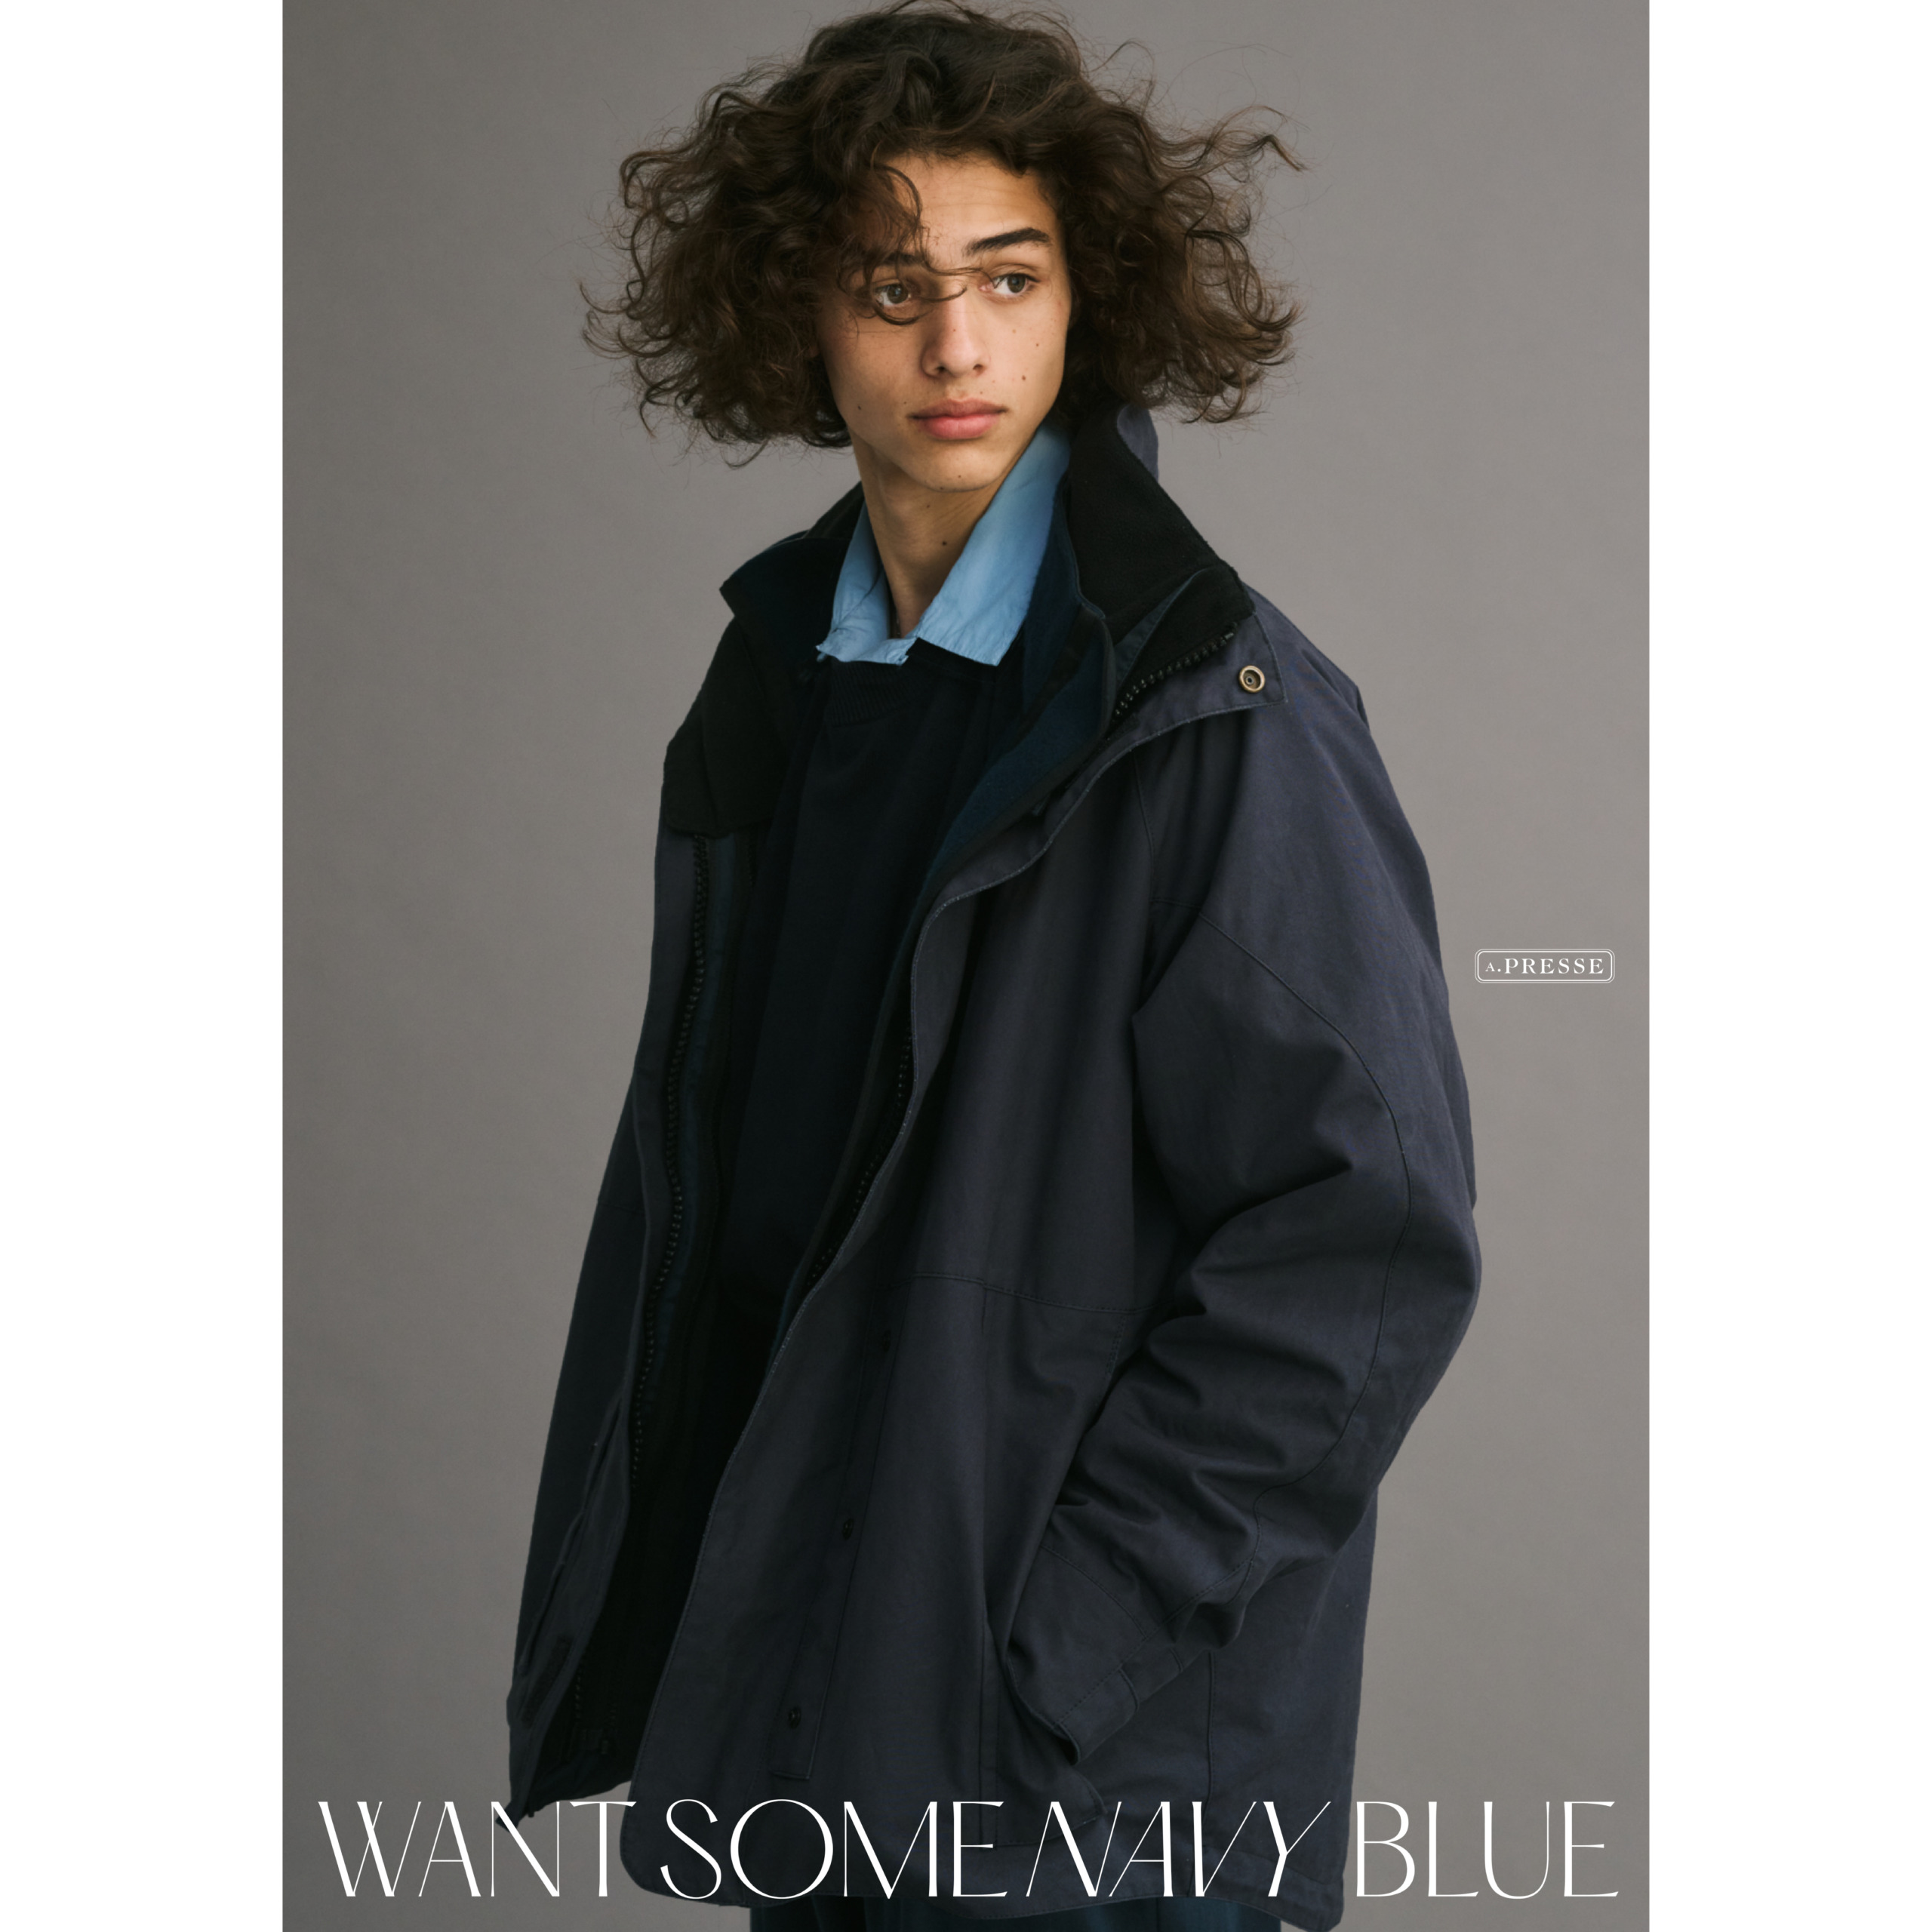 A.PRESSE  	 		 		 	 	 		 			 				 					 	“WANT SOME NAVY BLUE”